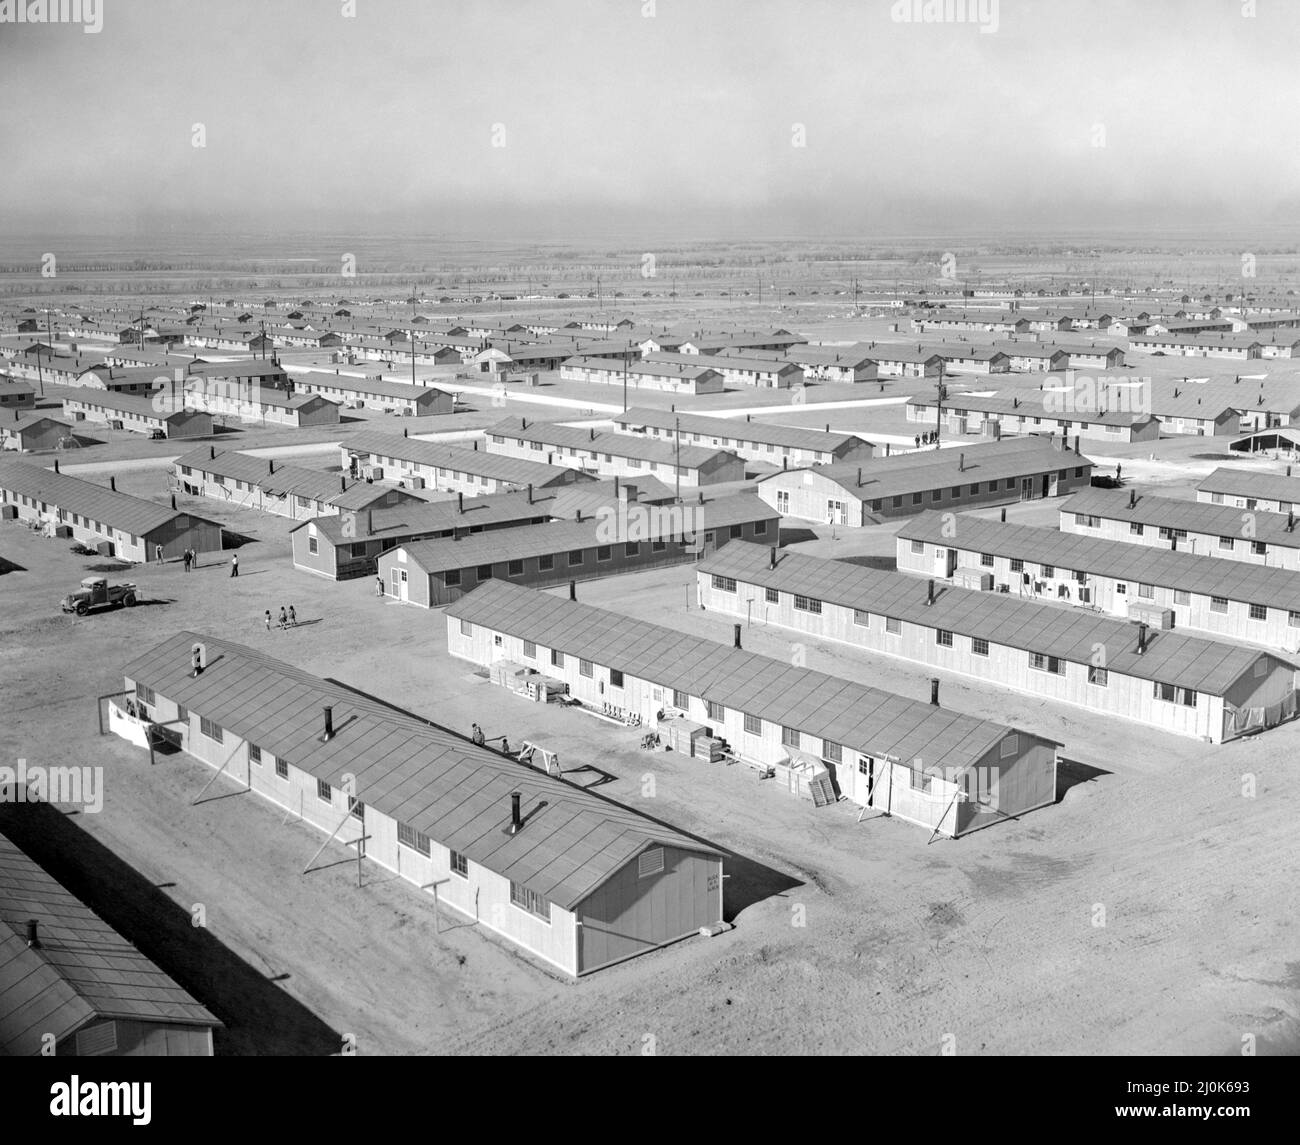 Aerial view of the Granada Relocation Center, an internment camp for Americans of Japanese descent during World War II, December 9, 1942 in Amache, Colorado. The site of Camp Amache was declared a National Historic Site by President Joe Biden on March 18, 2022. Stock Photo